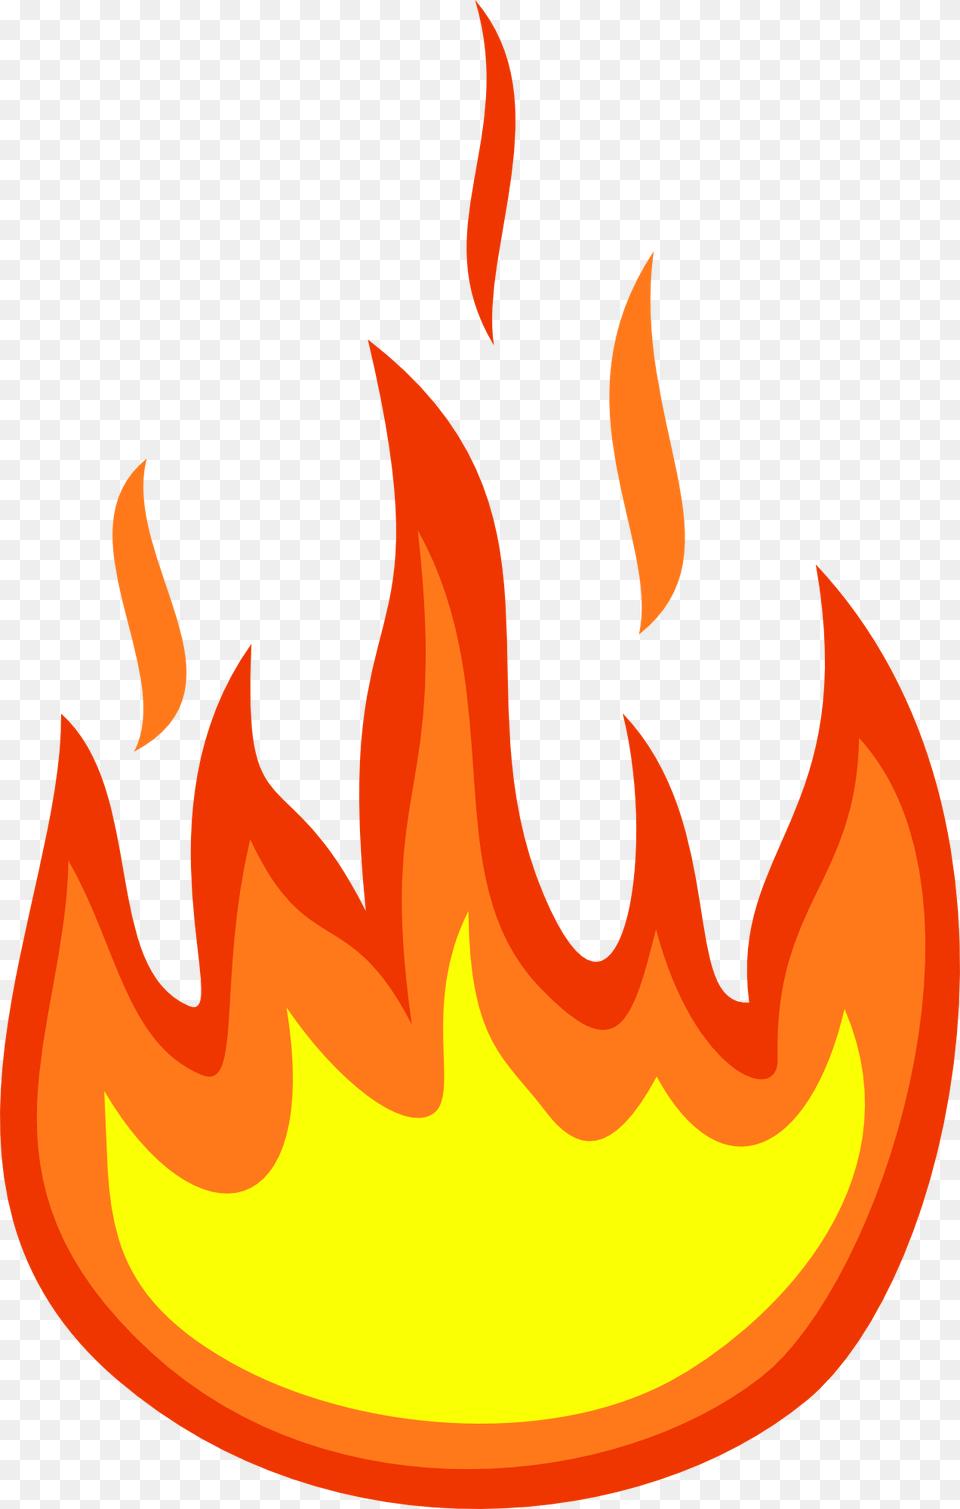 Fire Flame Cutie Mark Mlp Fire Cutie Mark Free Png Download